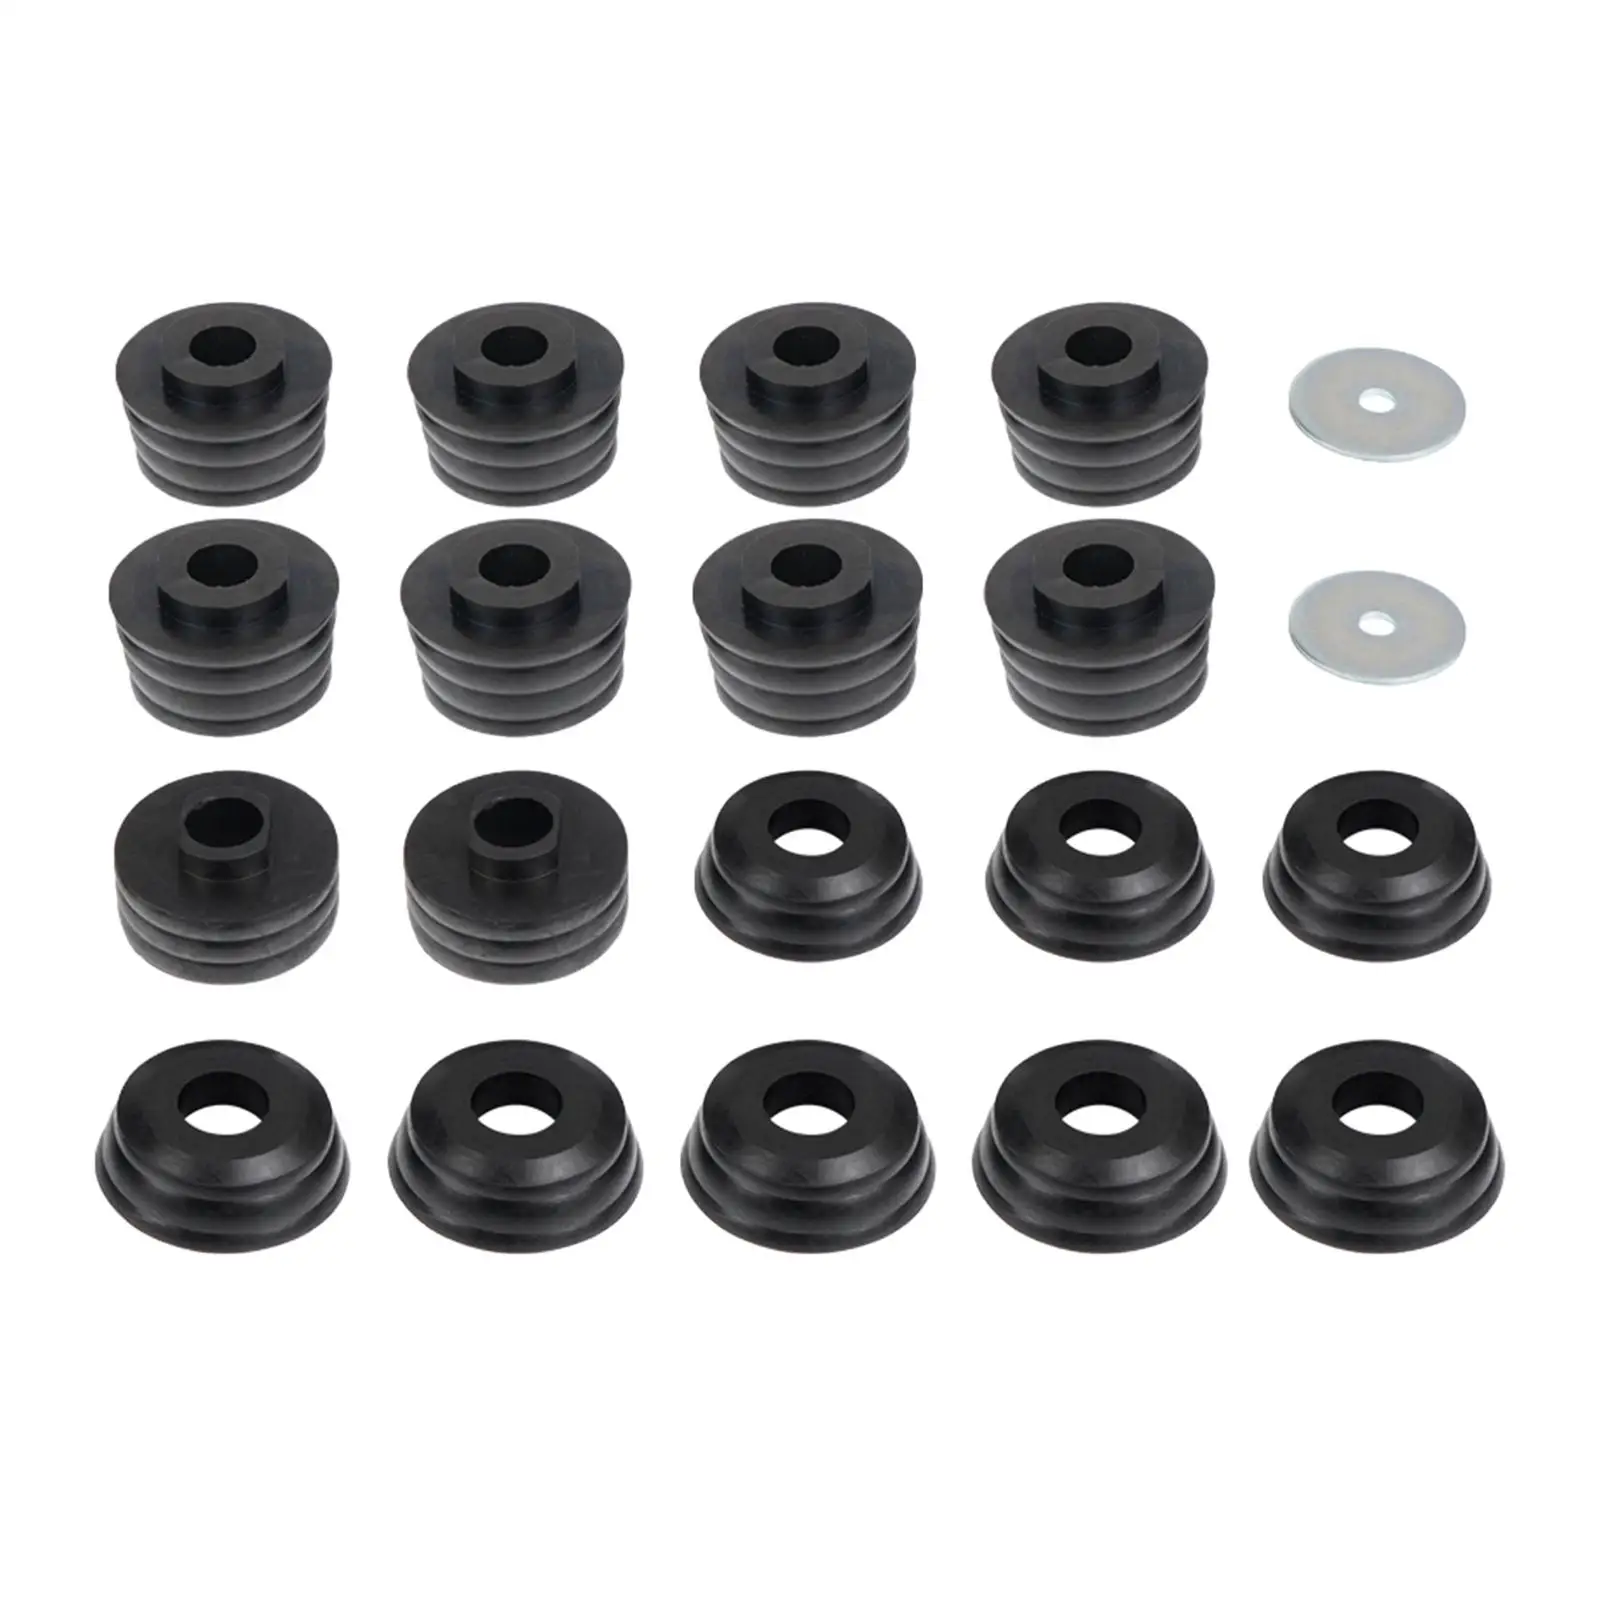 Body Cab Mount Bushing Set Car Body Cab Mounts for GMC Sierra 1500 2500 2WD 4WD 1999-2014 Accessories Upgrade Replacement